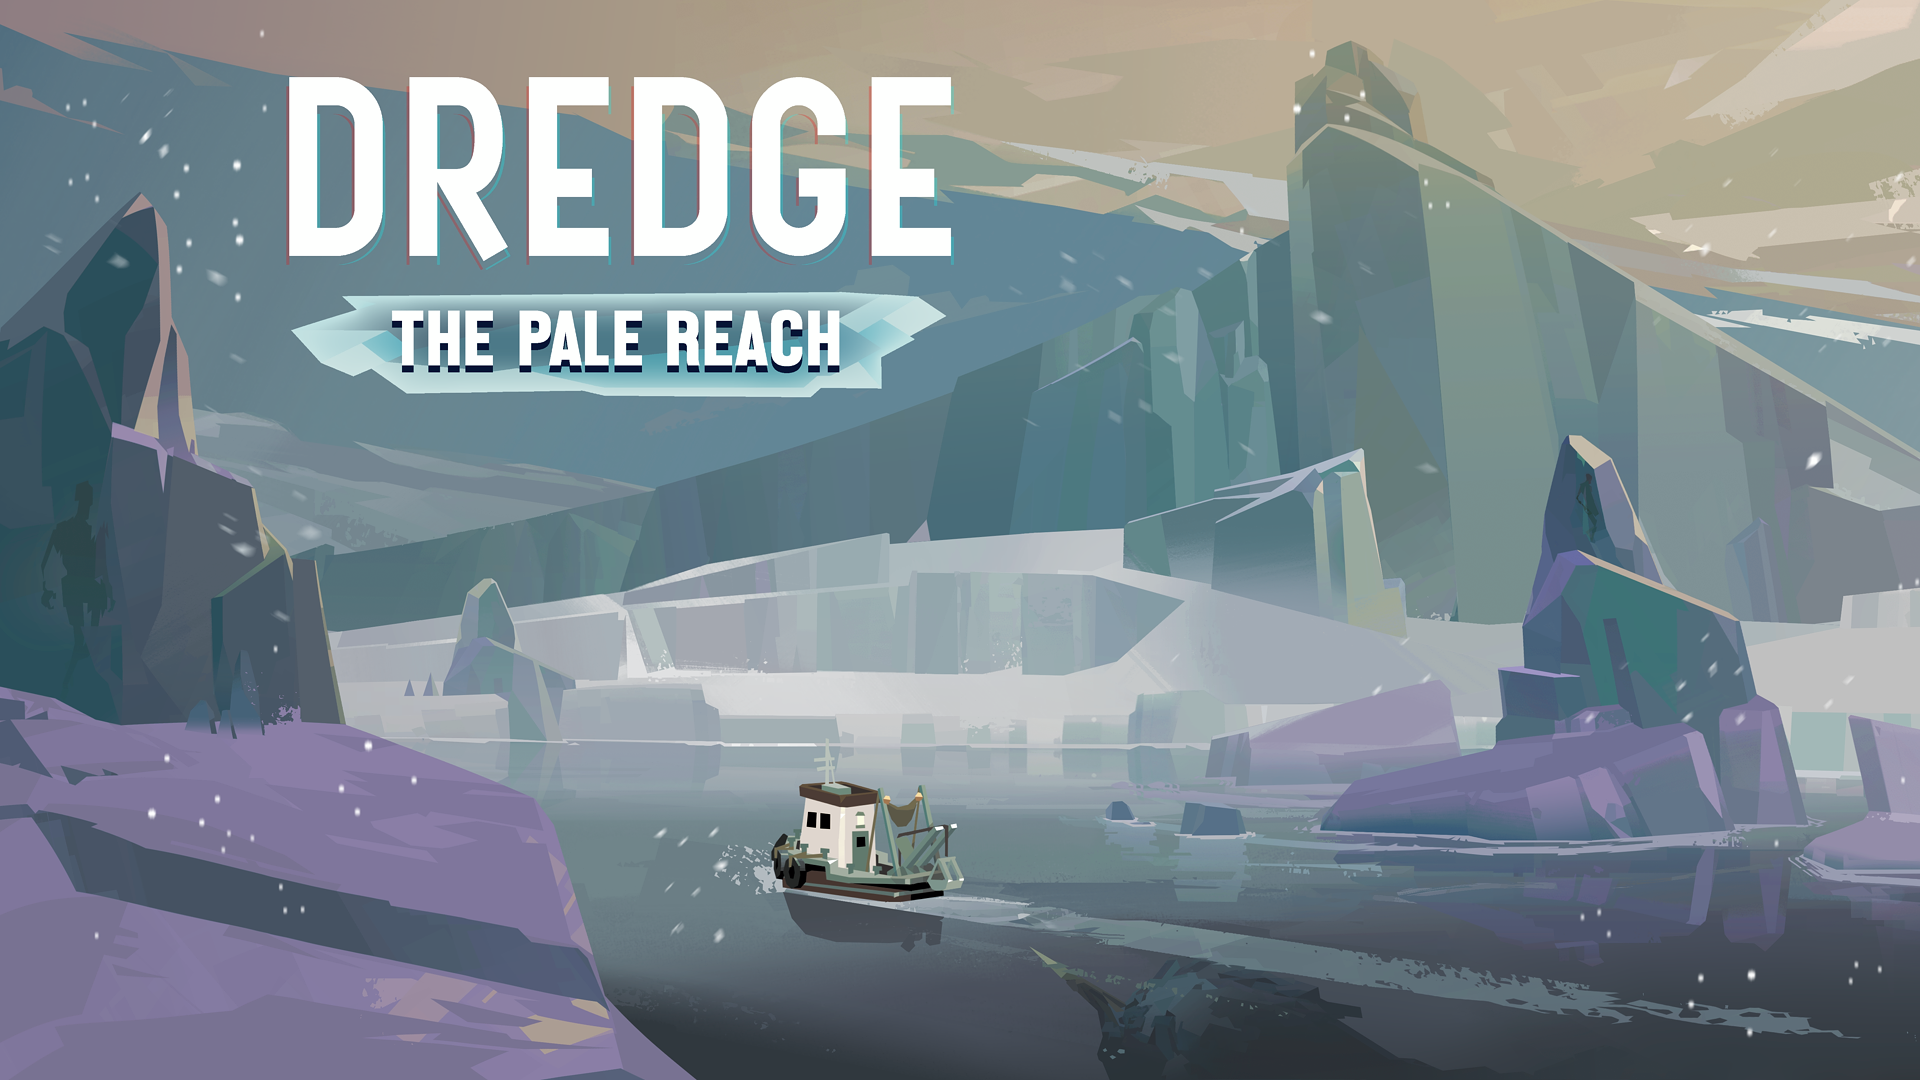 The key art for Dredge: The Pale Reach. It features a small fishing boat in an ice-blue area of water and cliffs.